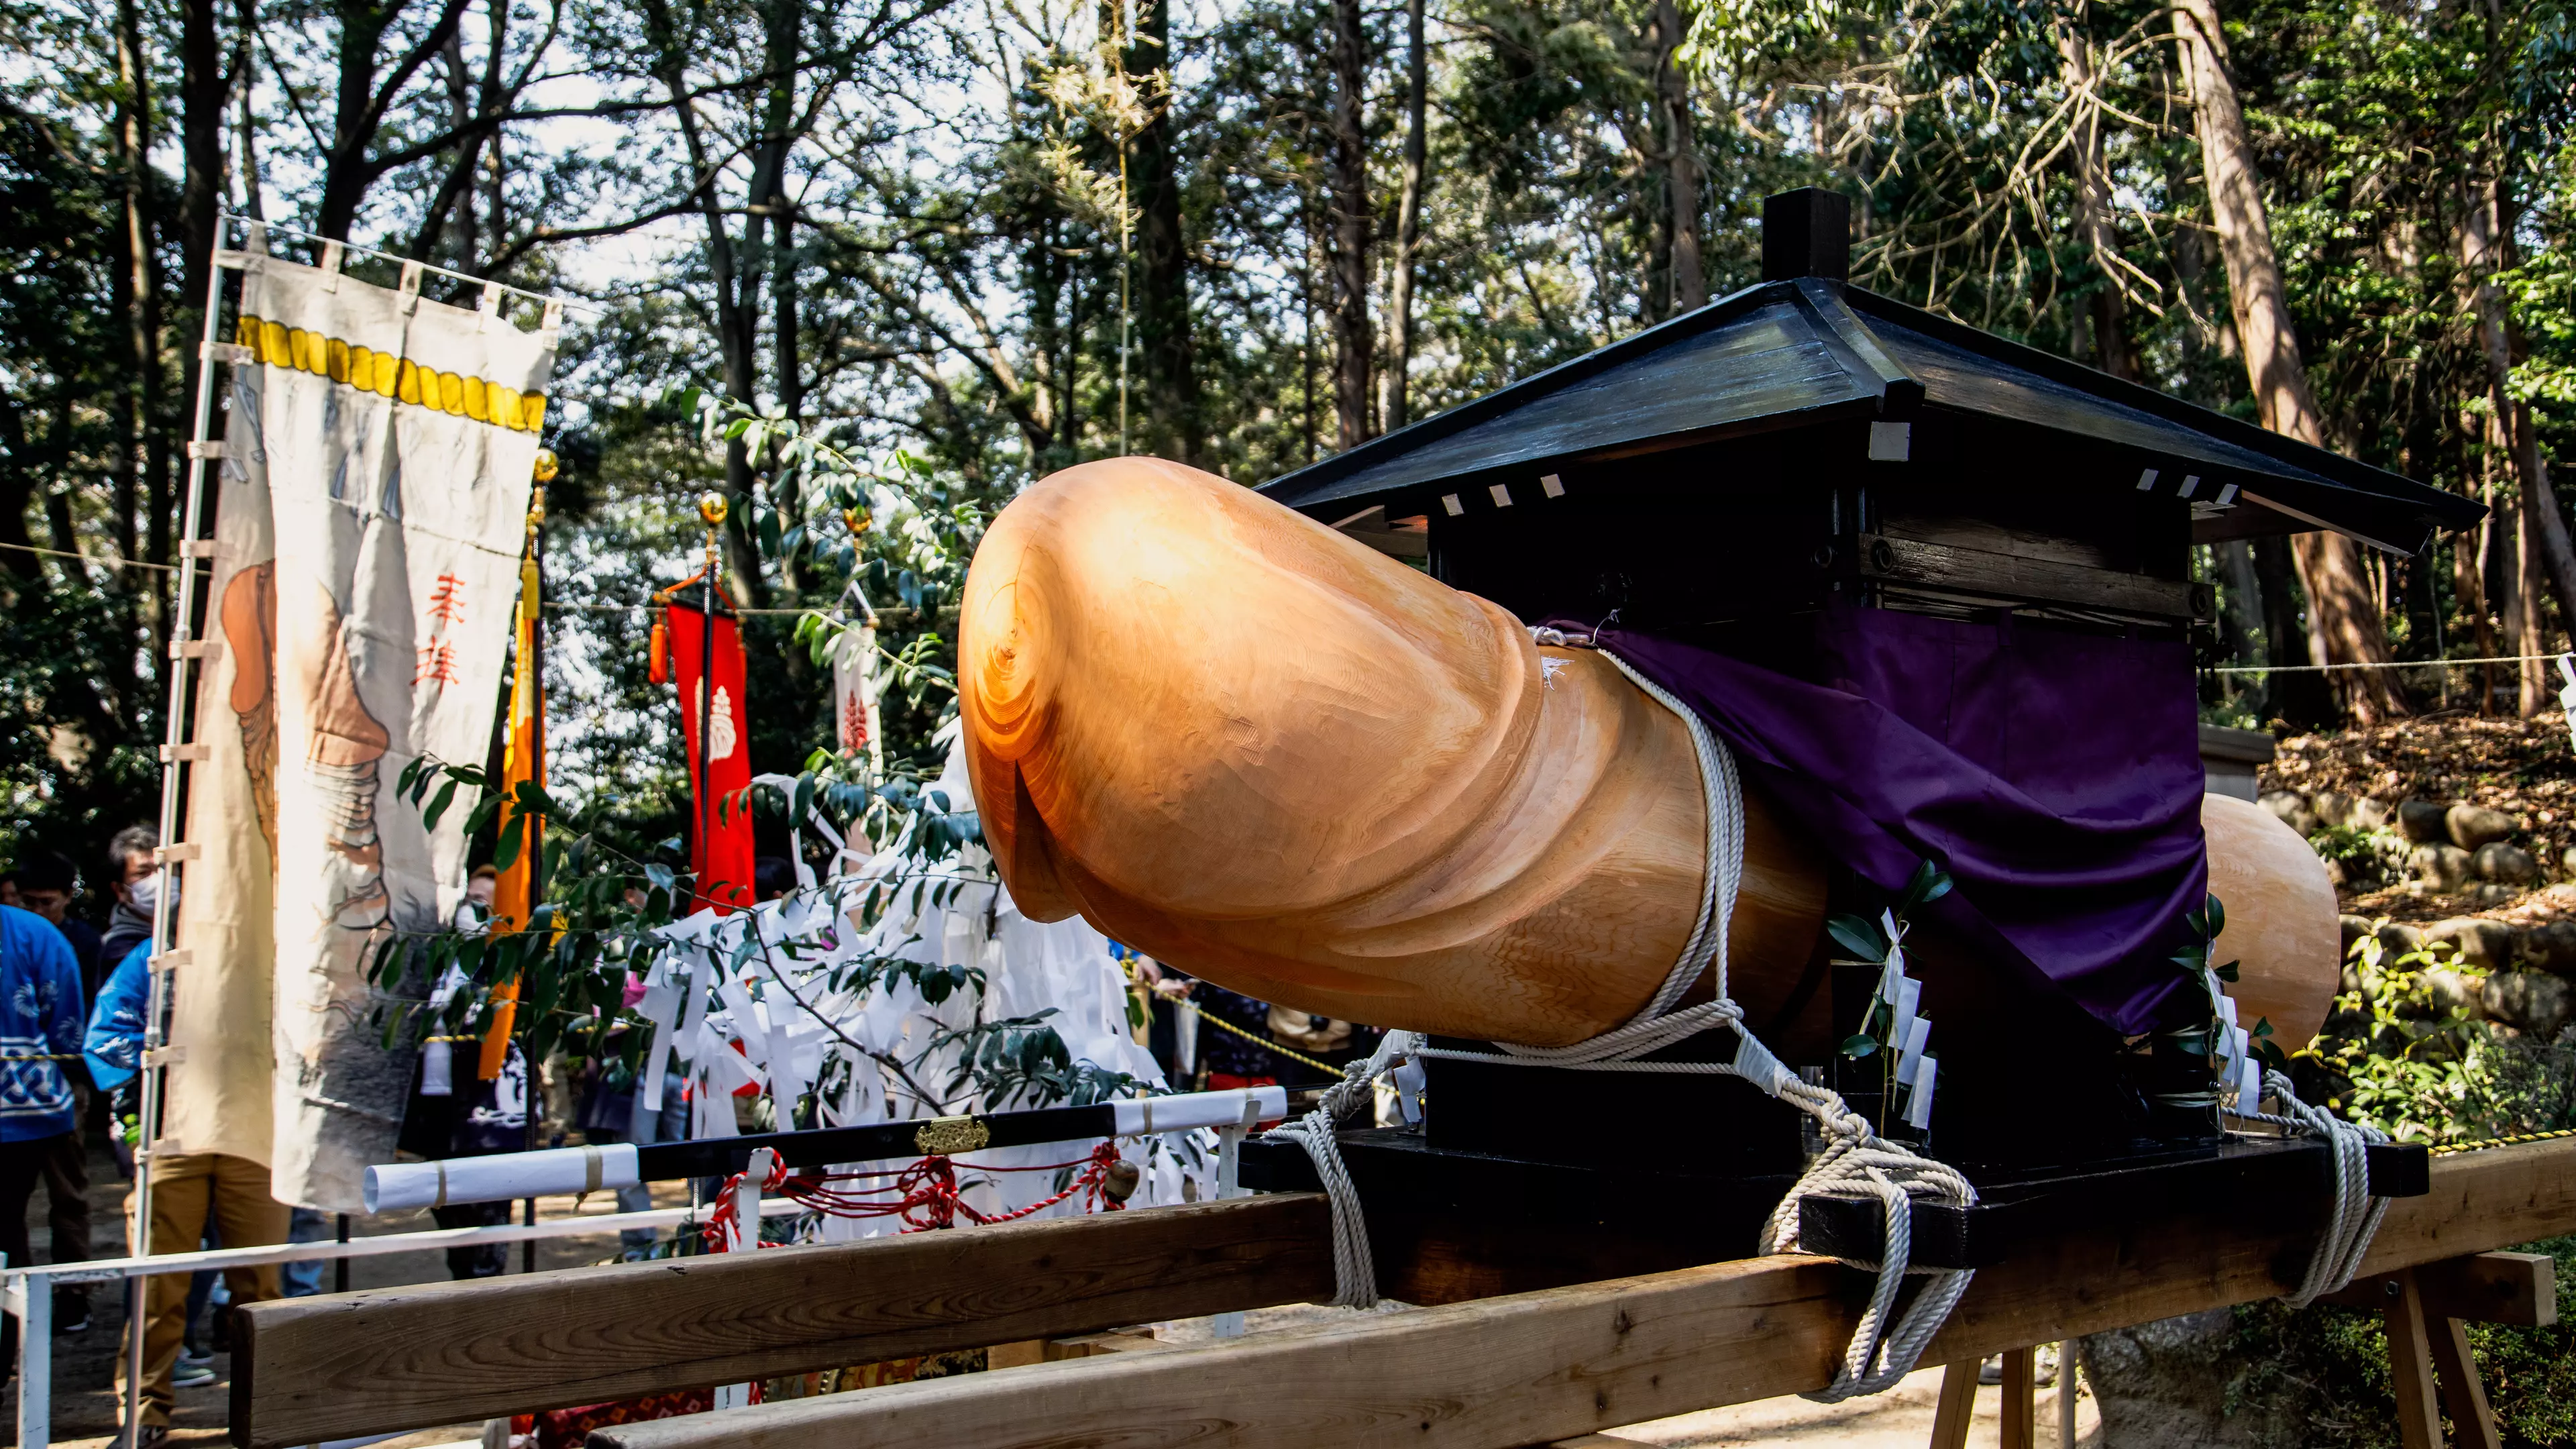 Thousands Watch On As Giant Phallus Is Paraded During Penis Festival